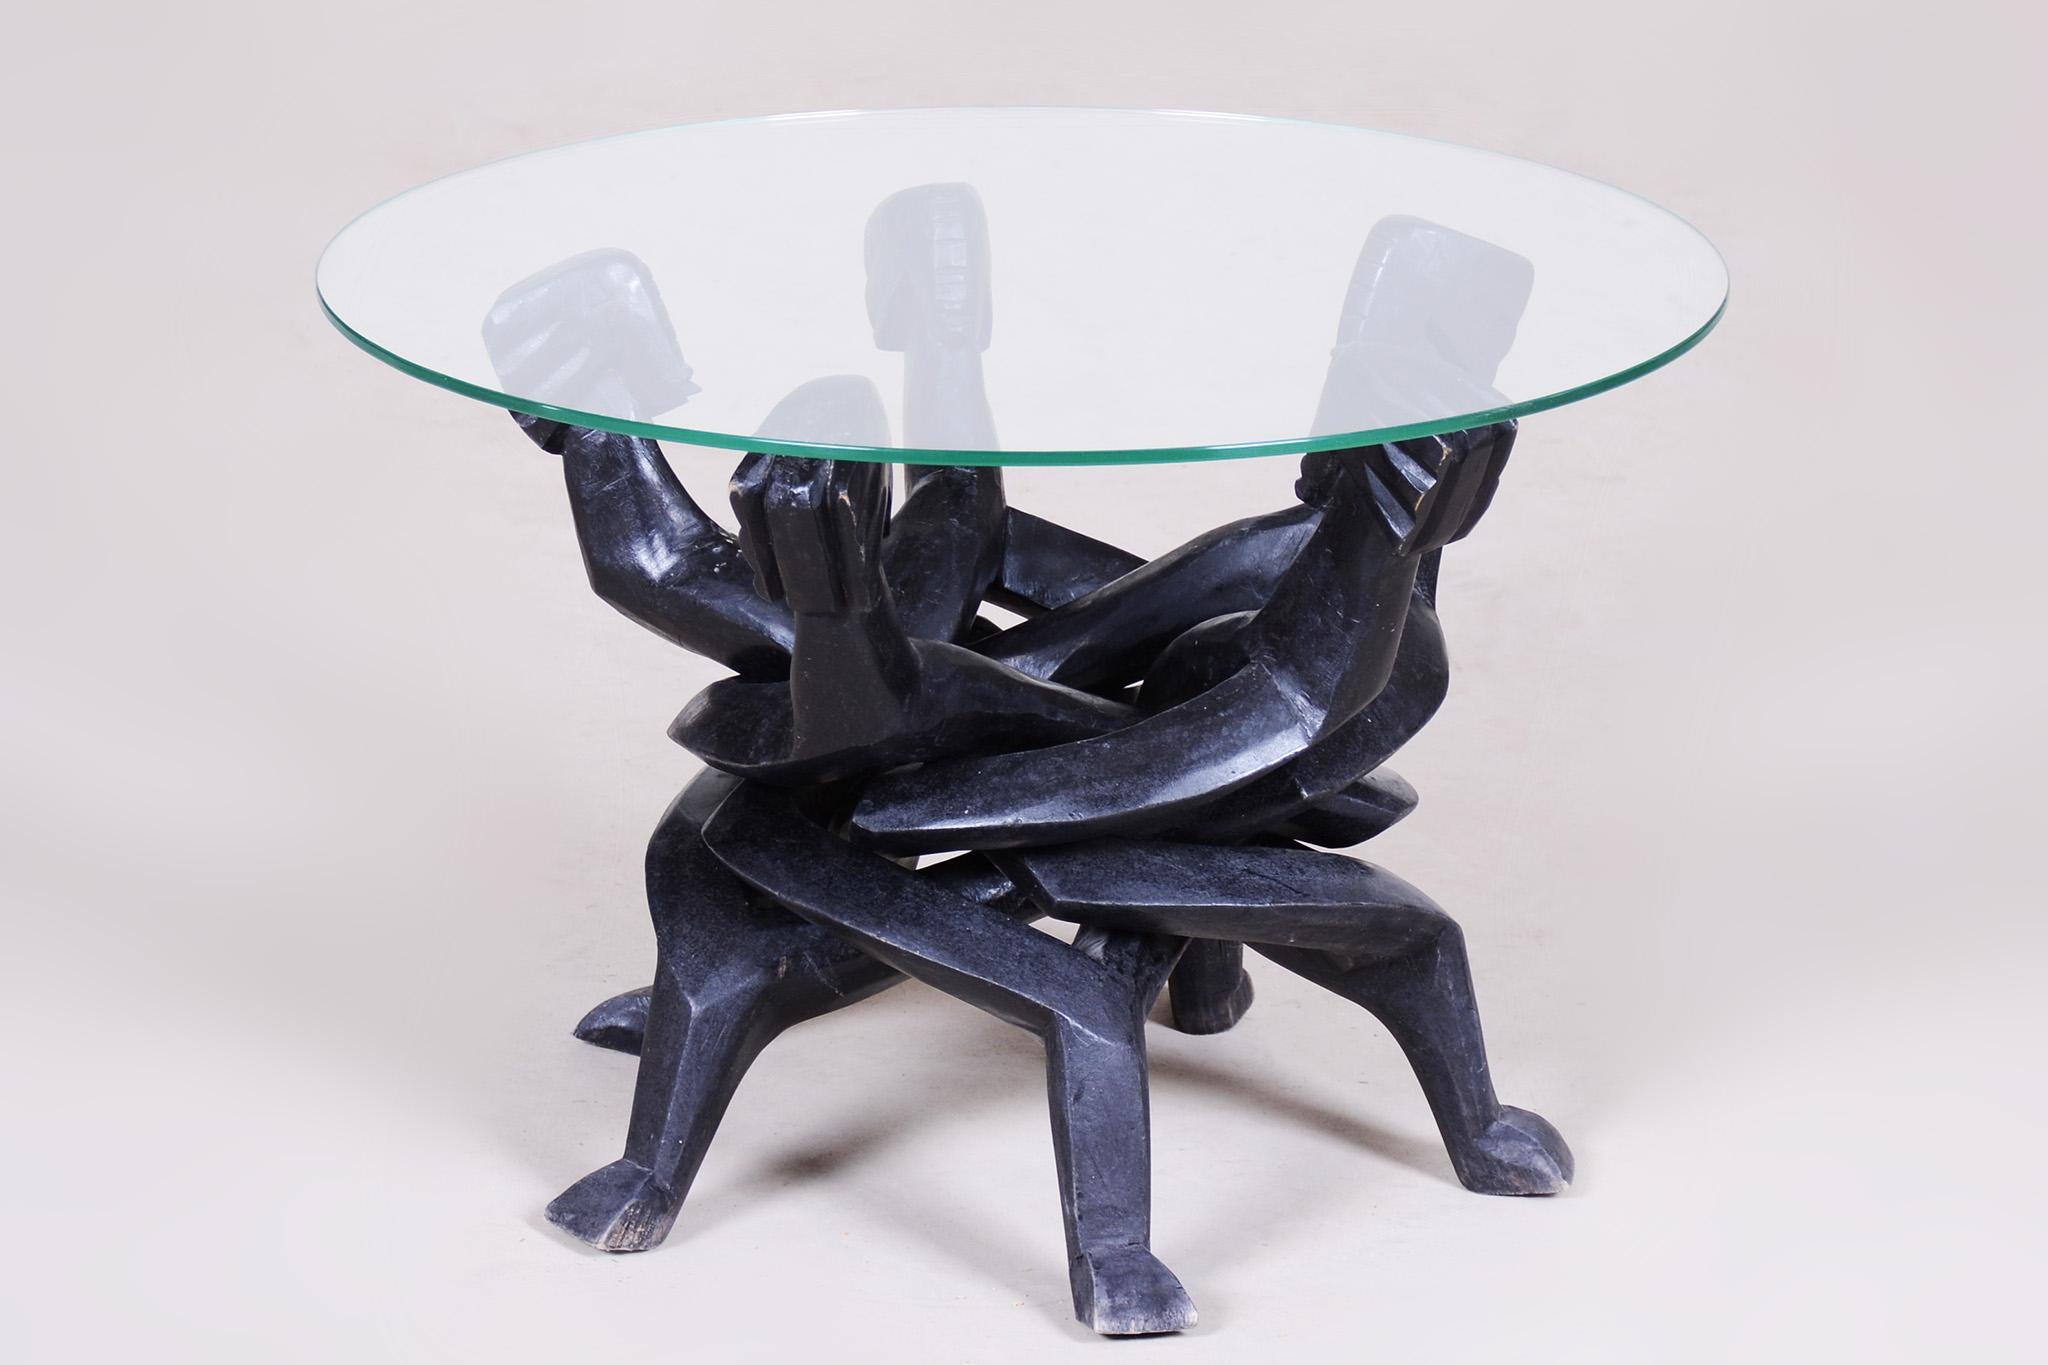 Unique Art Deco Folding Table Carved From One Piece of Ebony Wood, 1930s, Africa For Sale 1